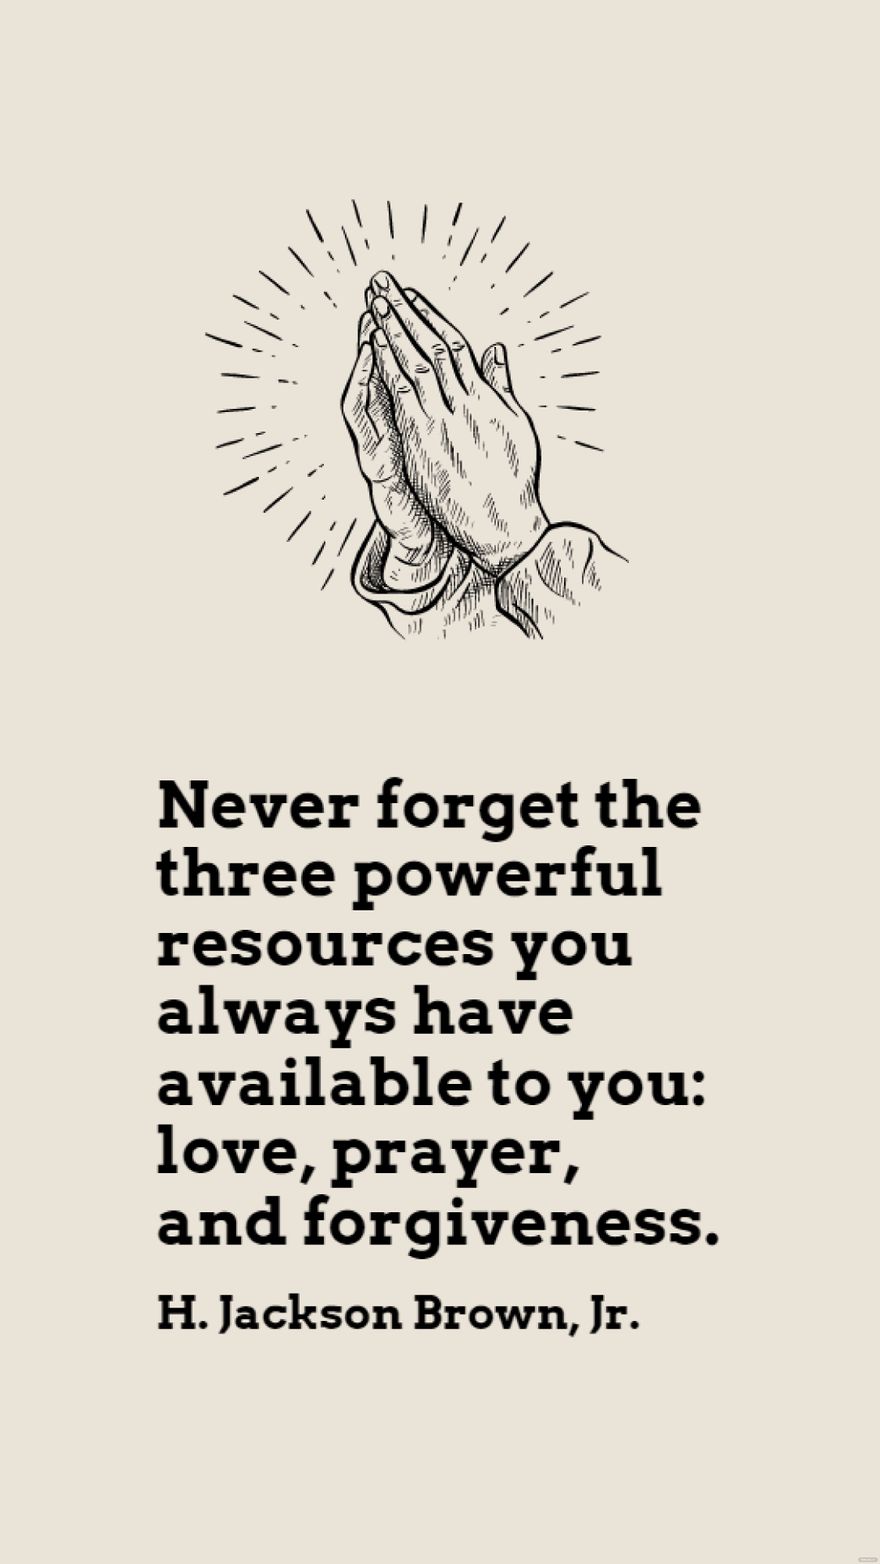 Free H. Jackson Brown, Jr. - Never forget the three powerful resources you always have available to you: love, prayer, and forgiveness. in JPG